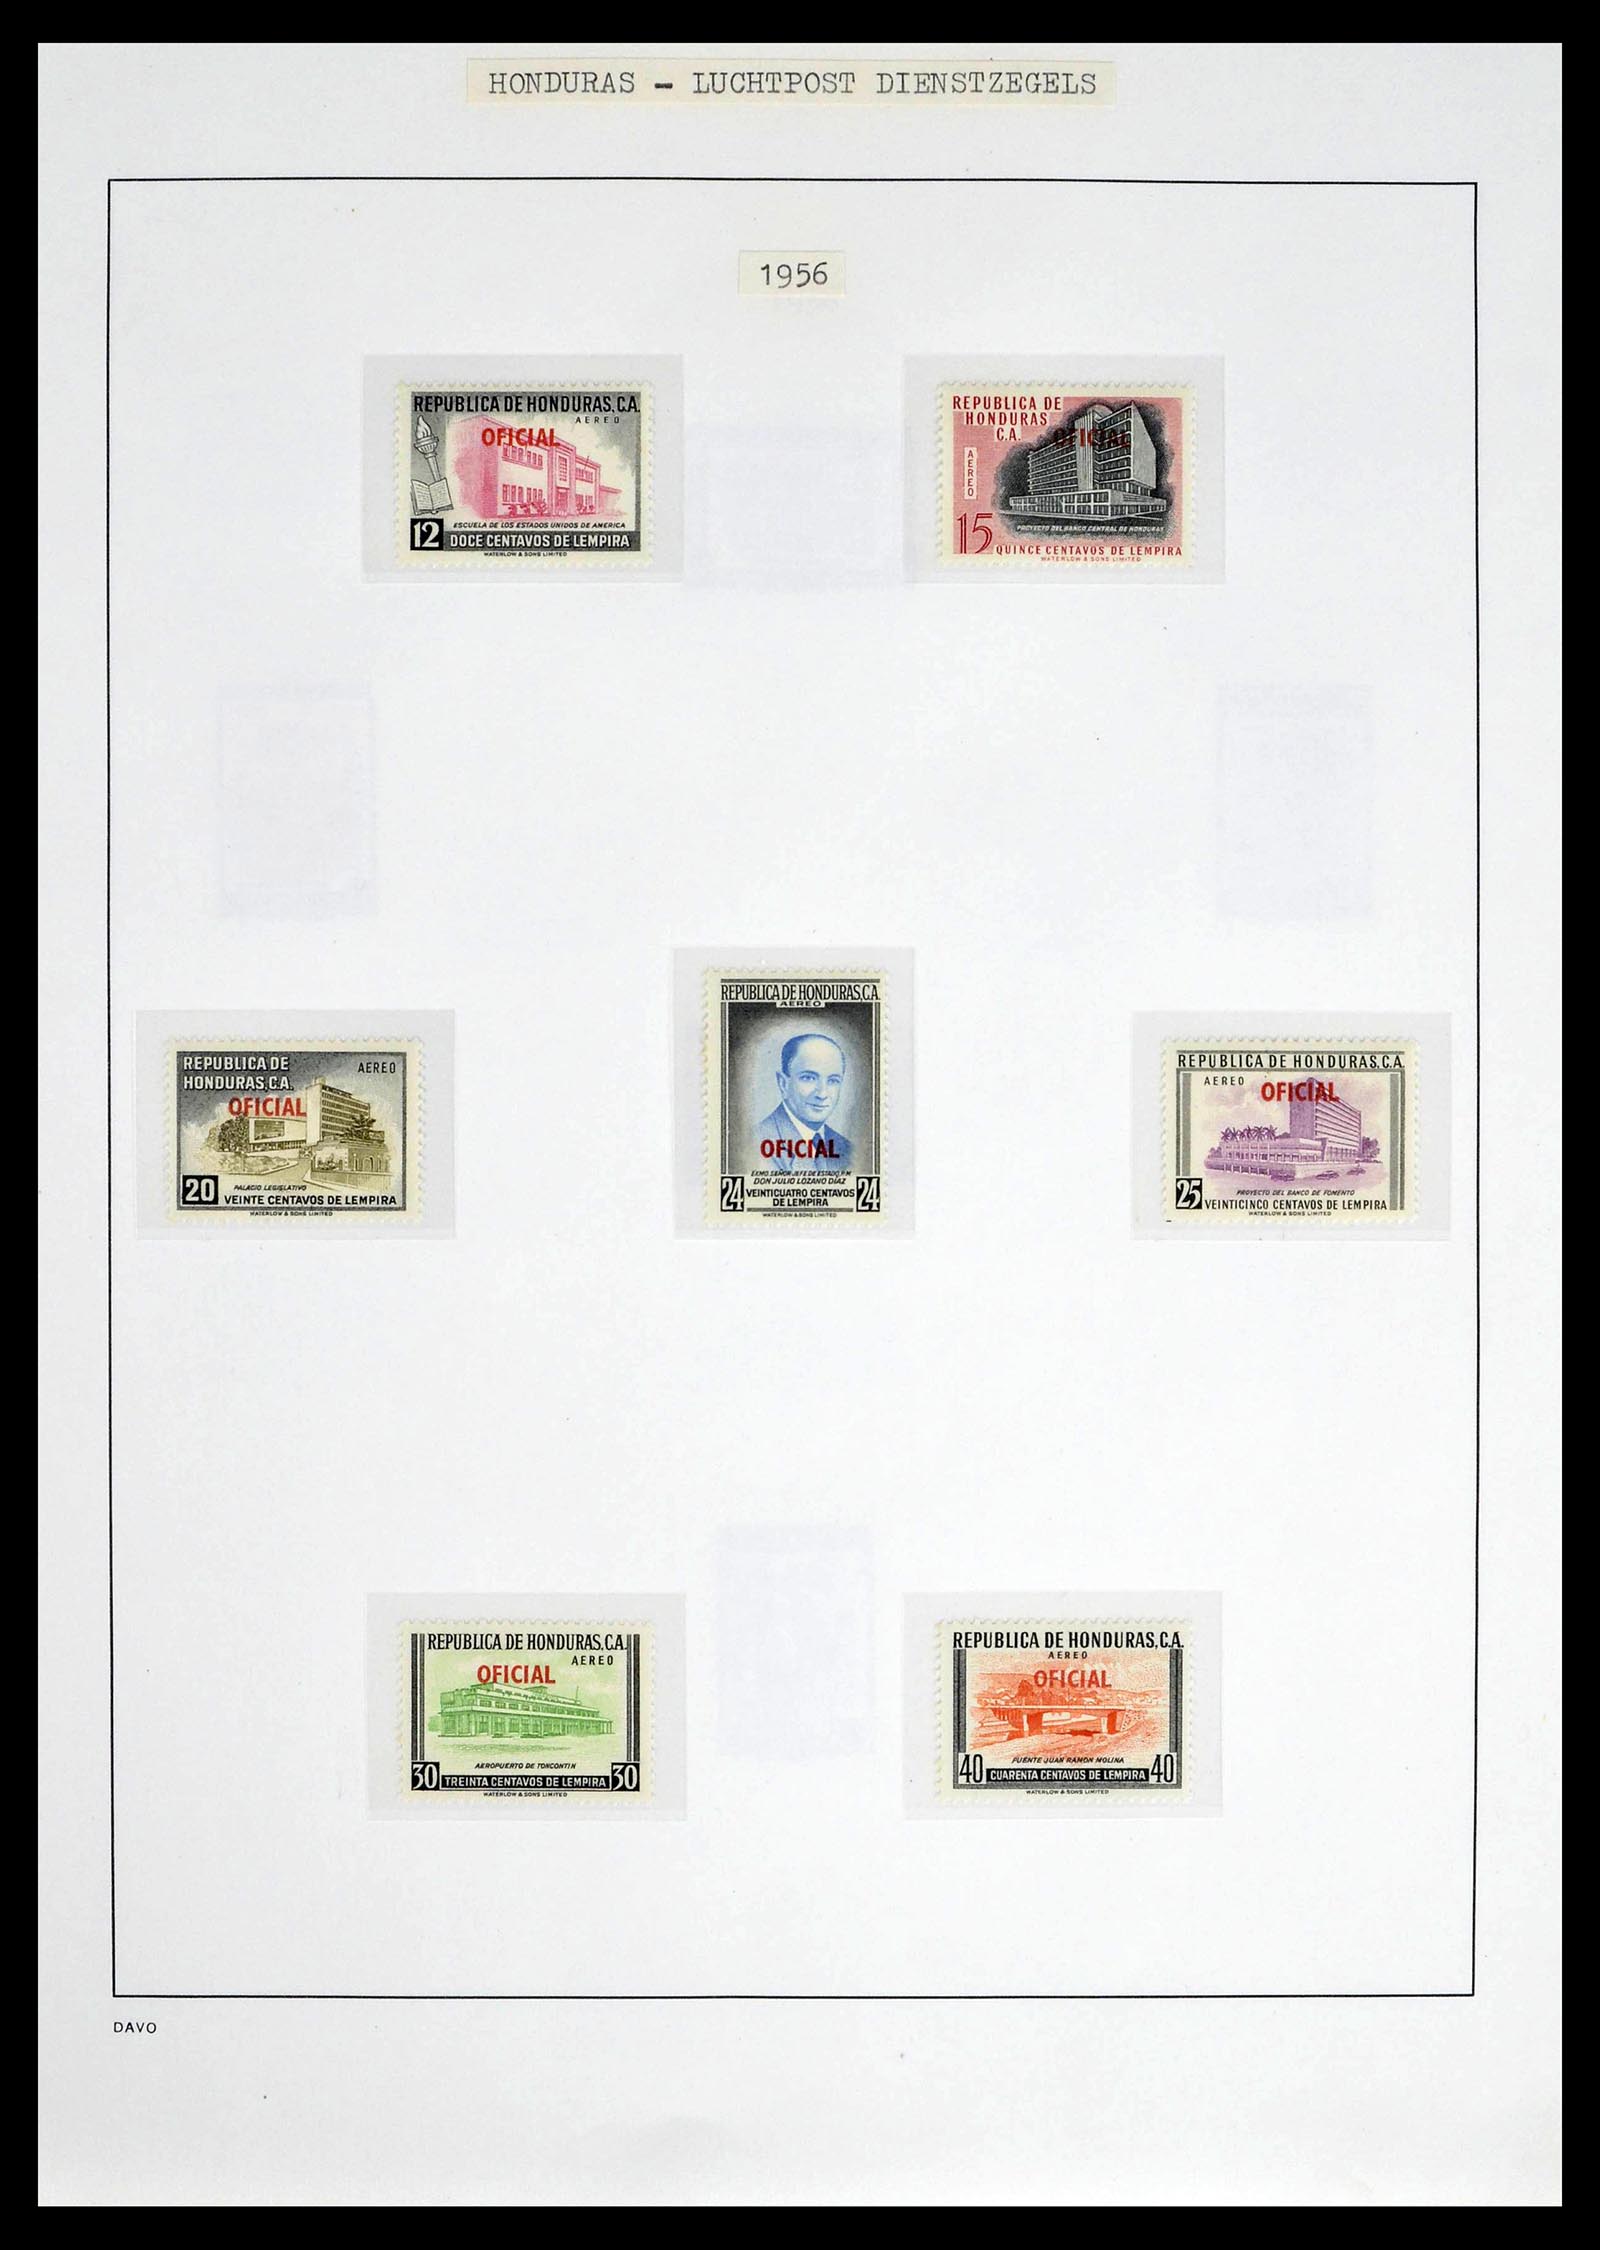 39404 0034 - Stamp collection 39404 Honduras service stamps 1890-1974.